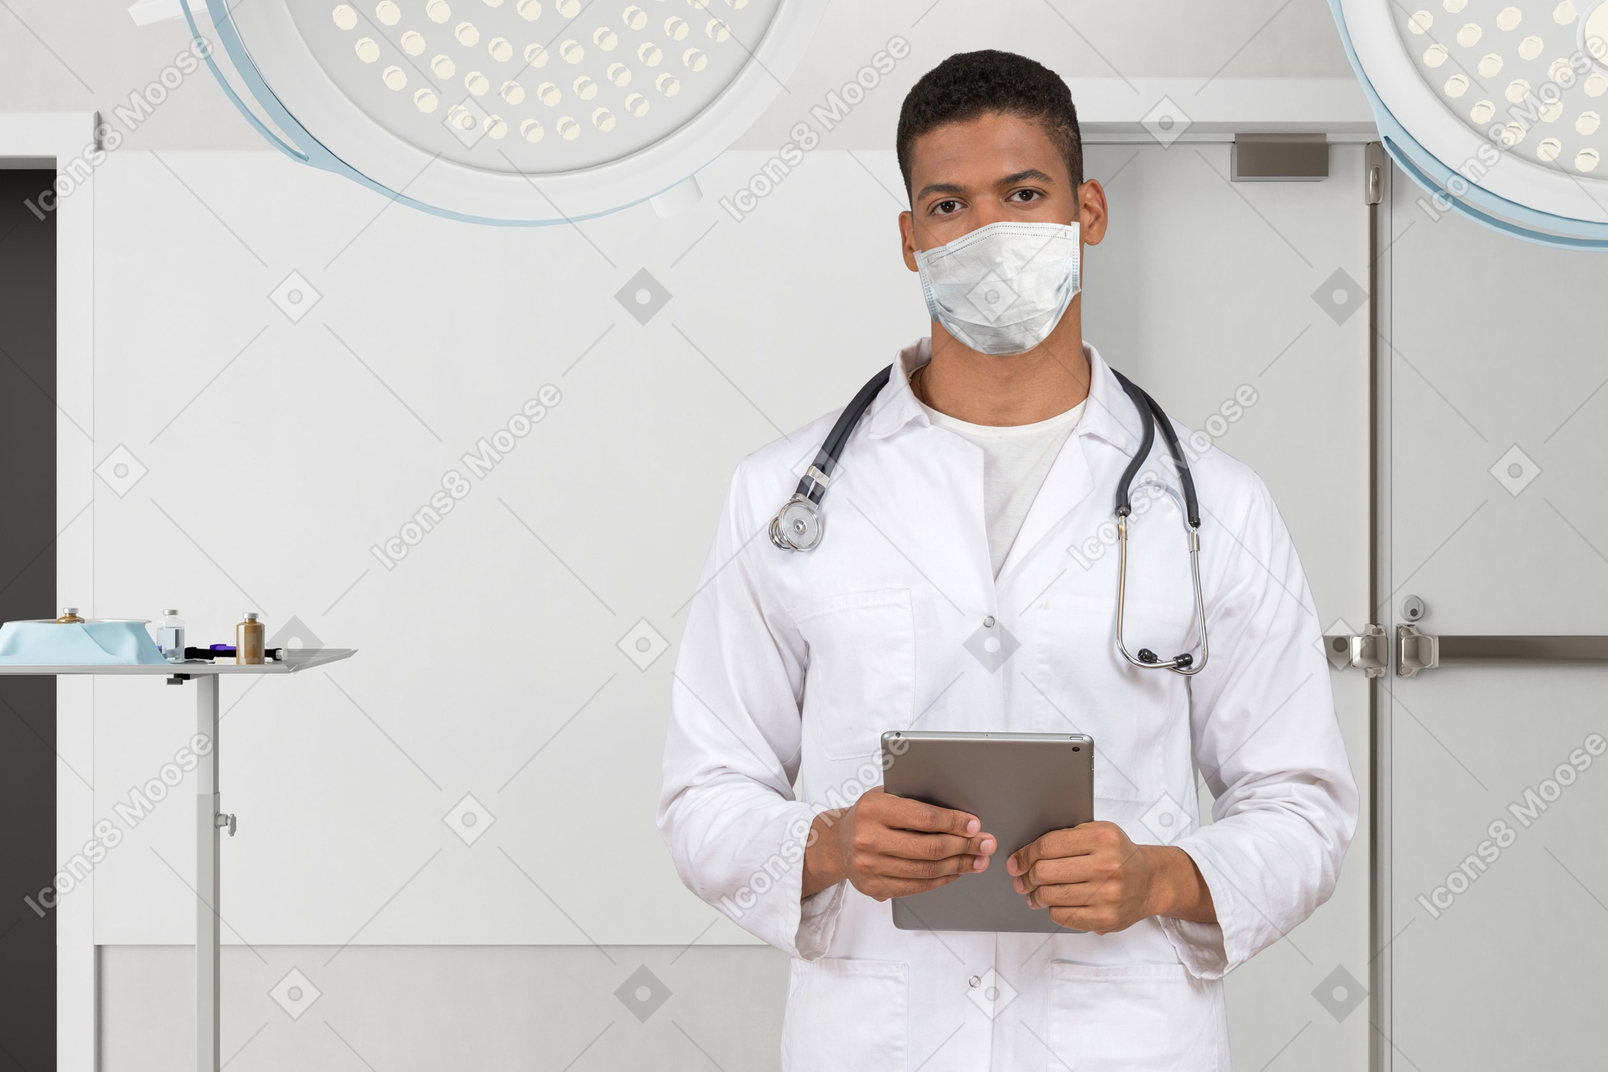 A male doctor in a white lab coat holding a tablet